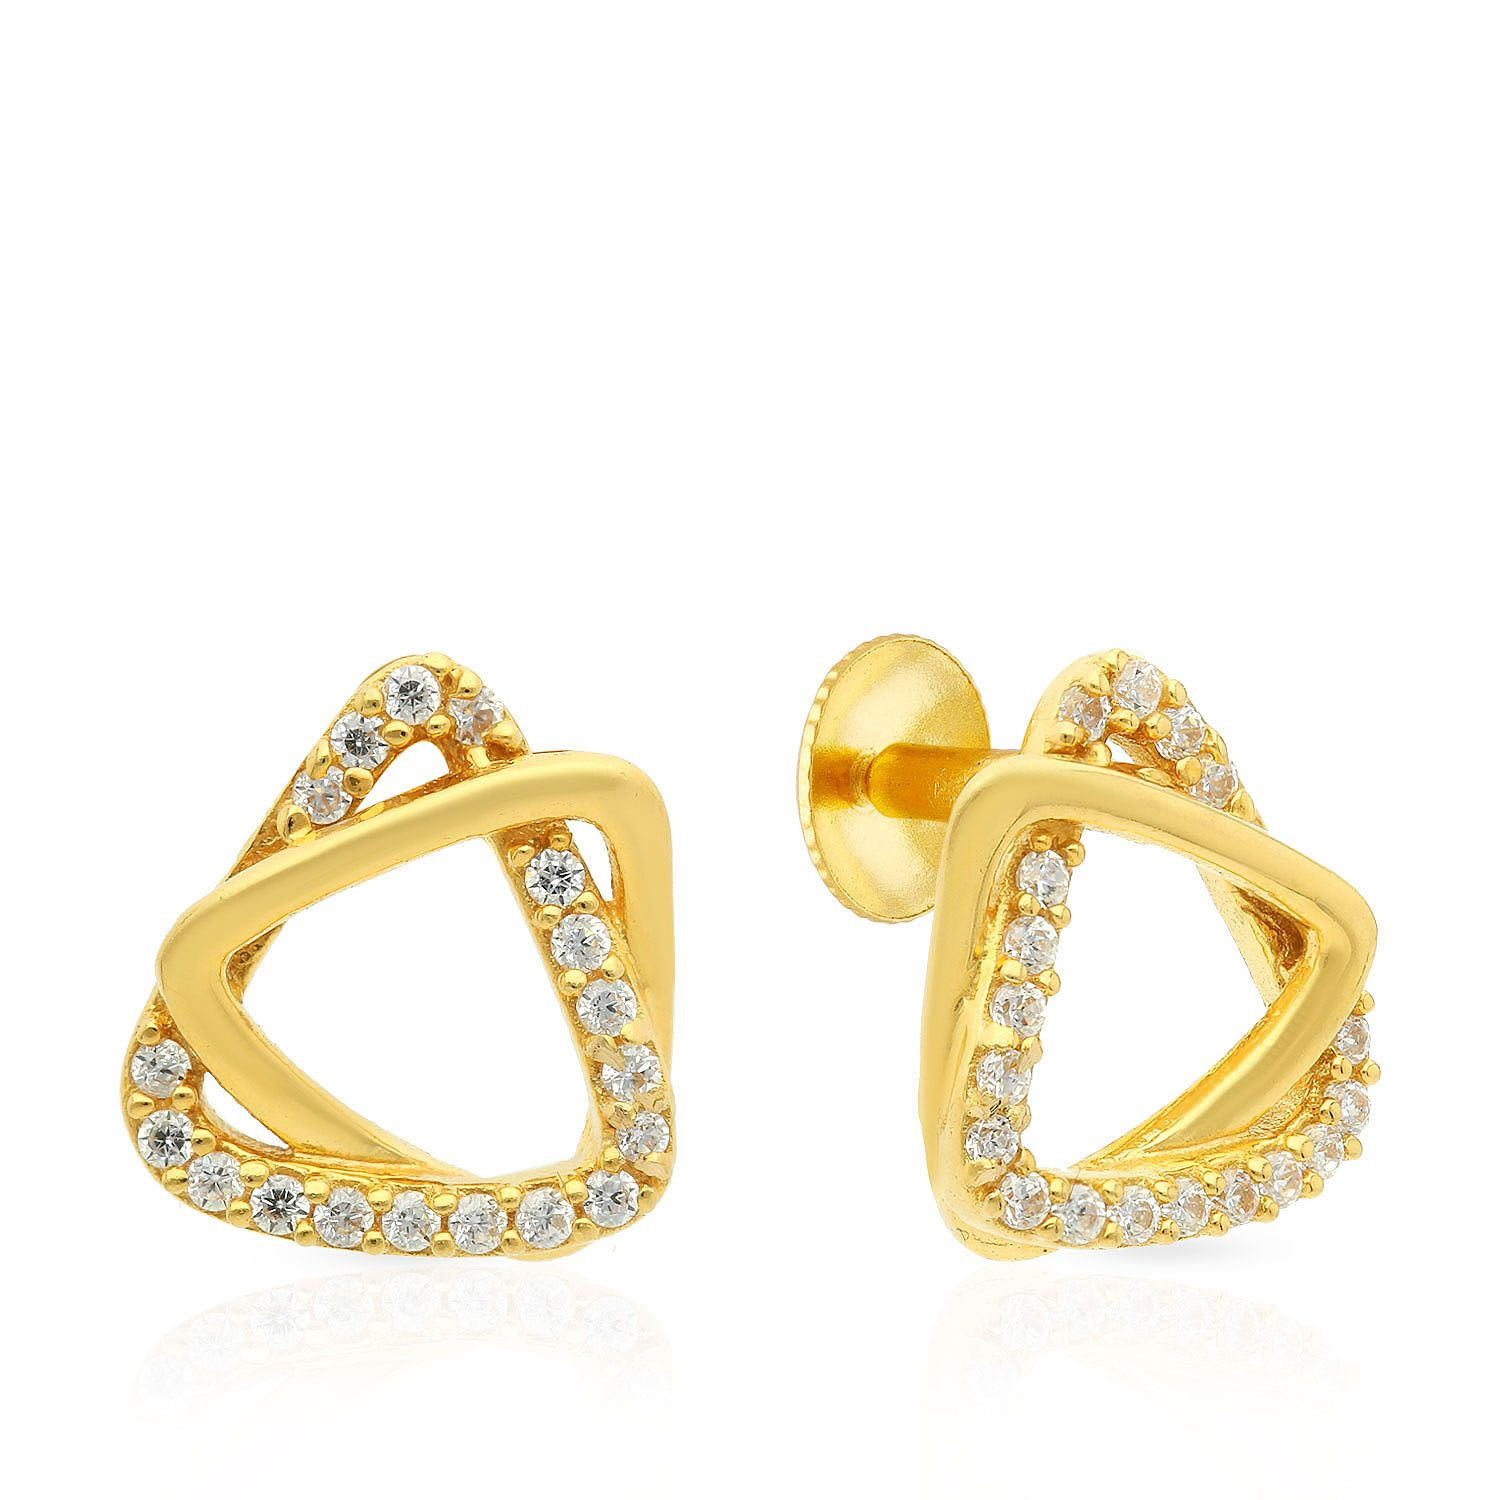 Update more than 79 diamond second stud earrings india super hot ...